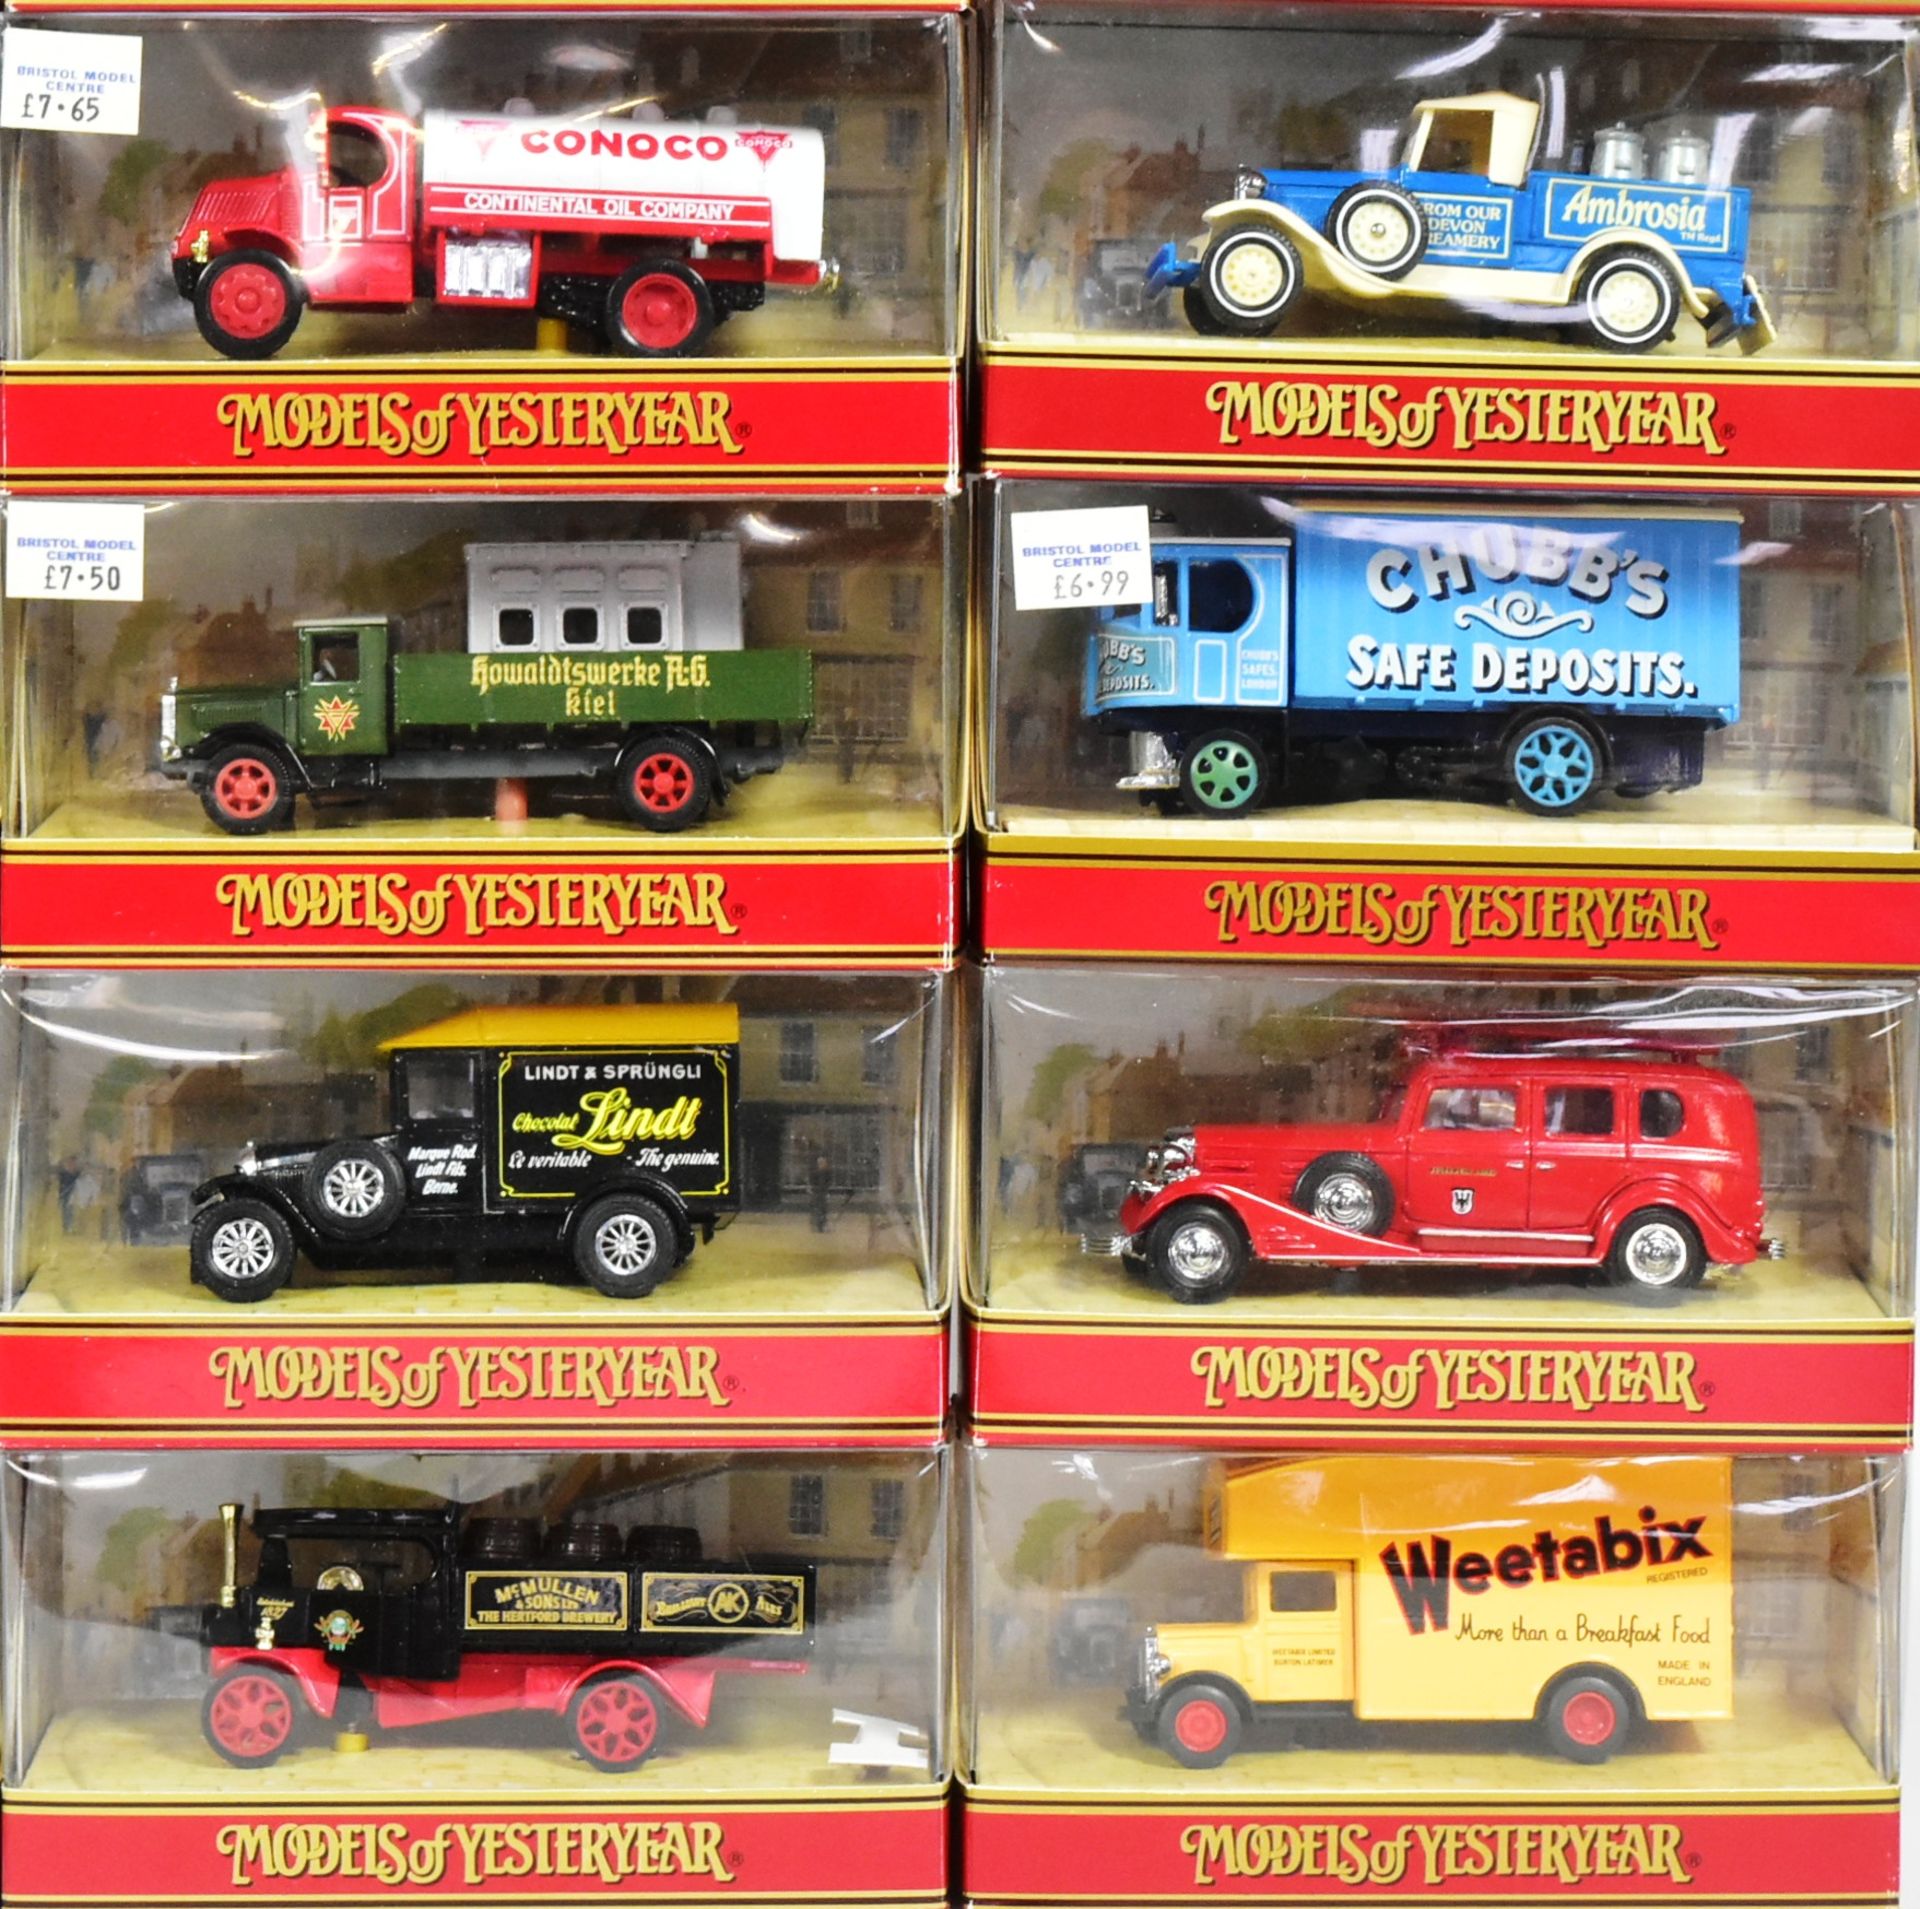 DIECAST - COLLECTION OF MATCHBOX MODELS OF YESTERYEAR - Image 4 of 5